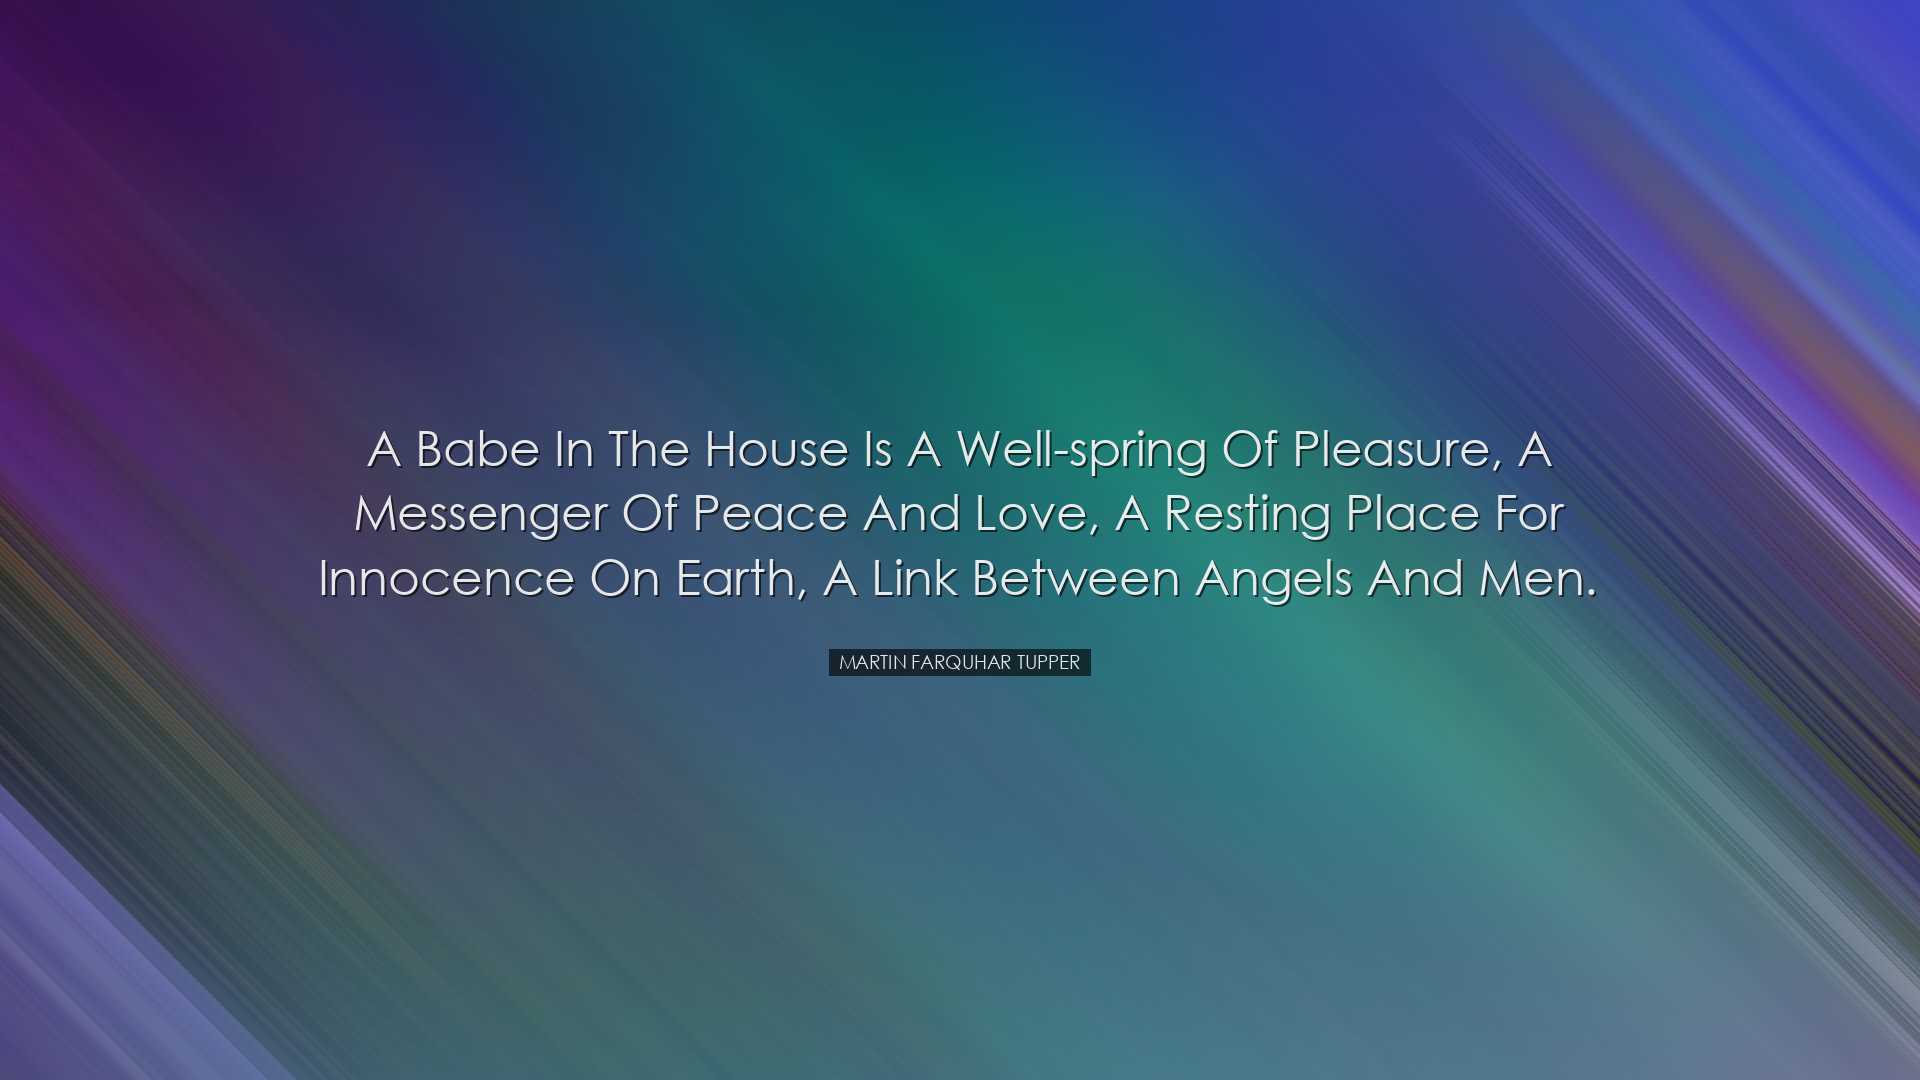 A babe in the house is a well-spring of pleasure, a messenger of p